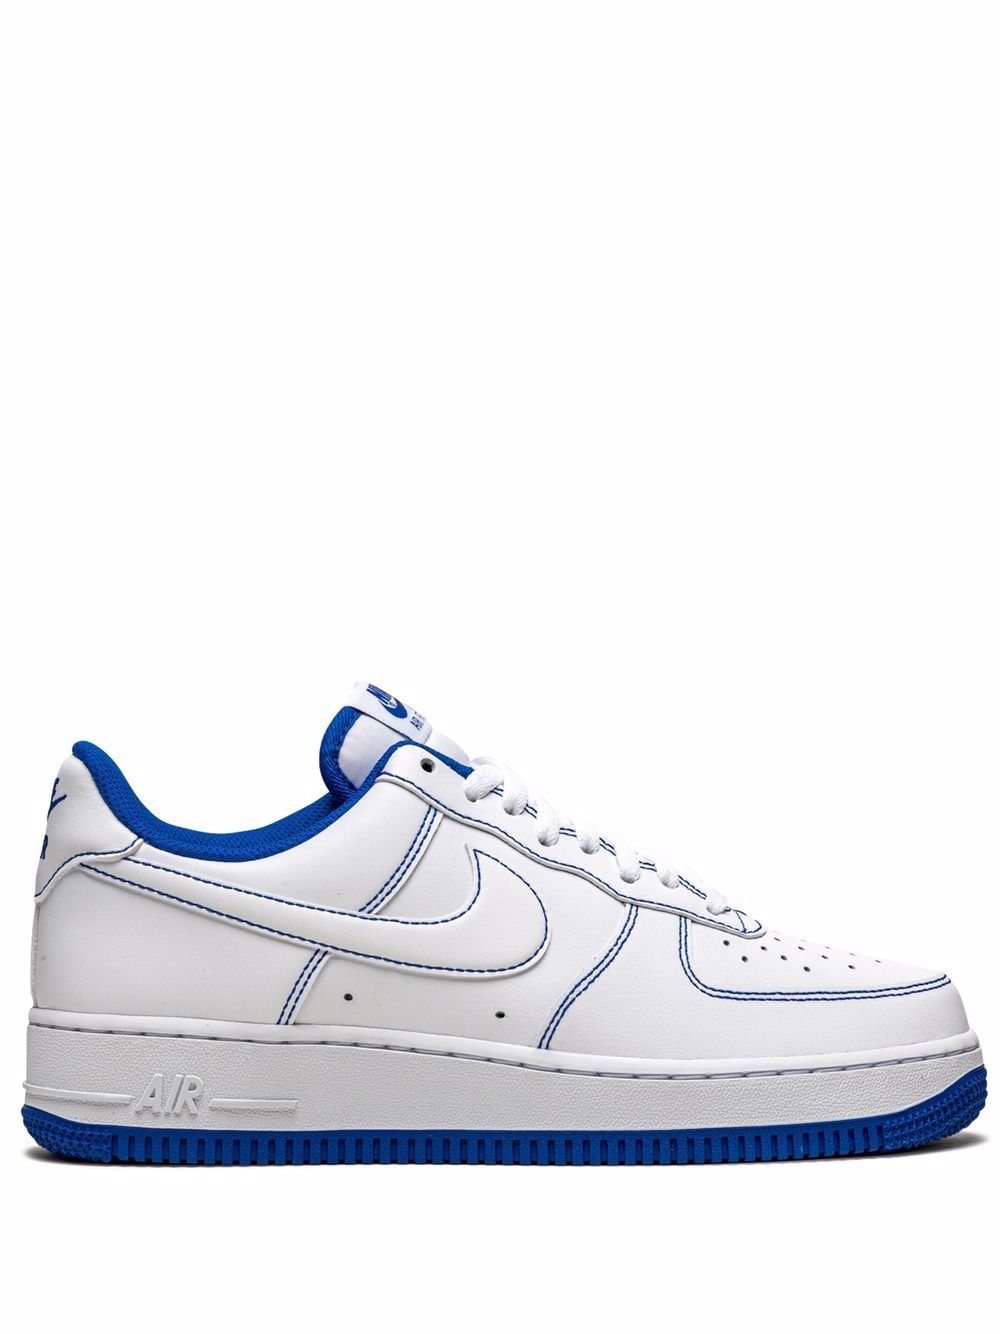 Nike Air Force 1 Low "Contrast Stitch/Game Royal" sneakers - White von Nike